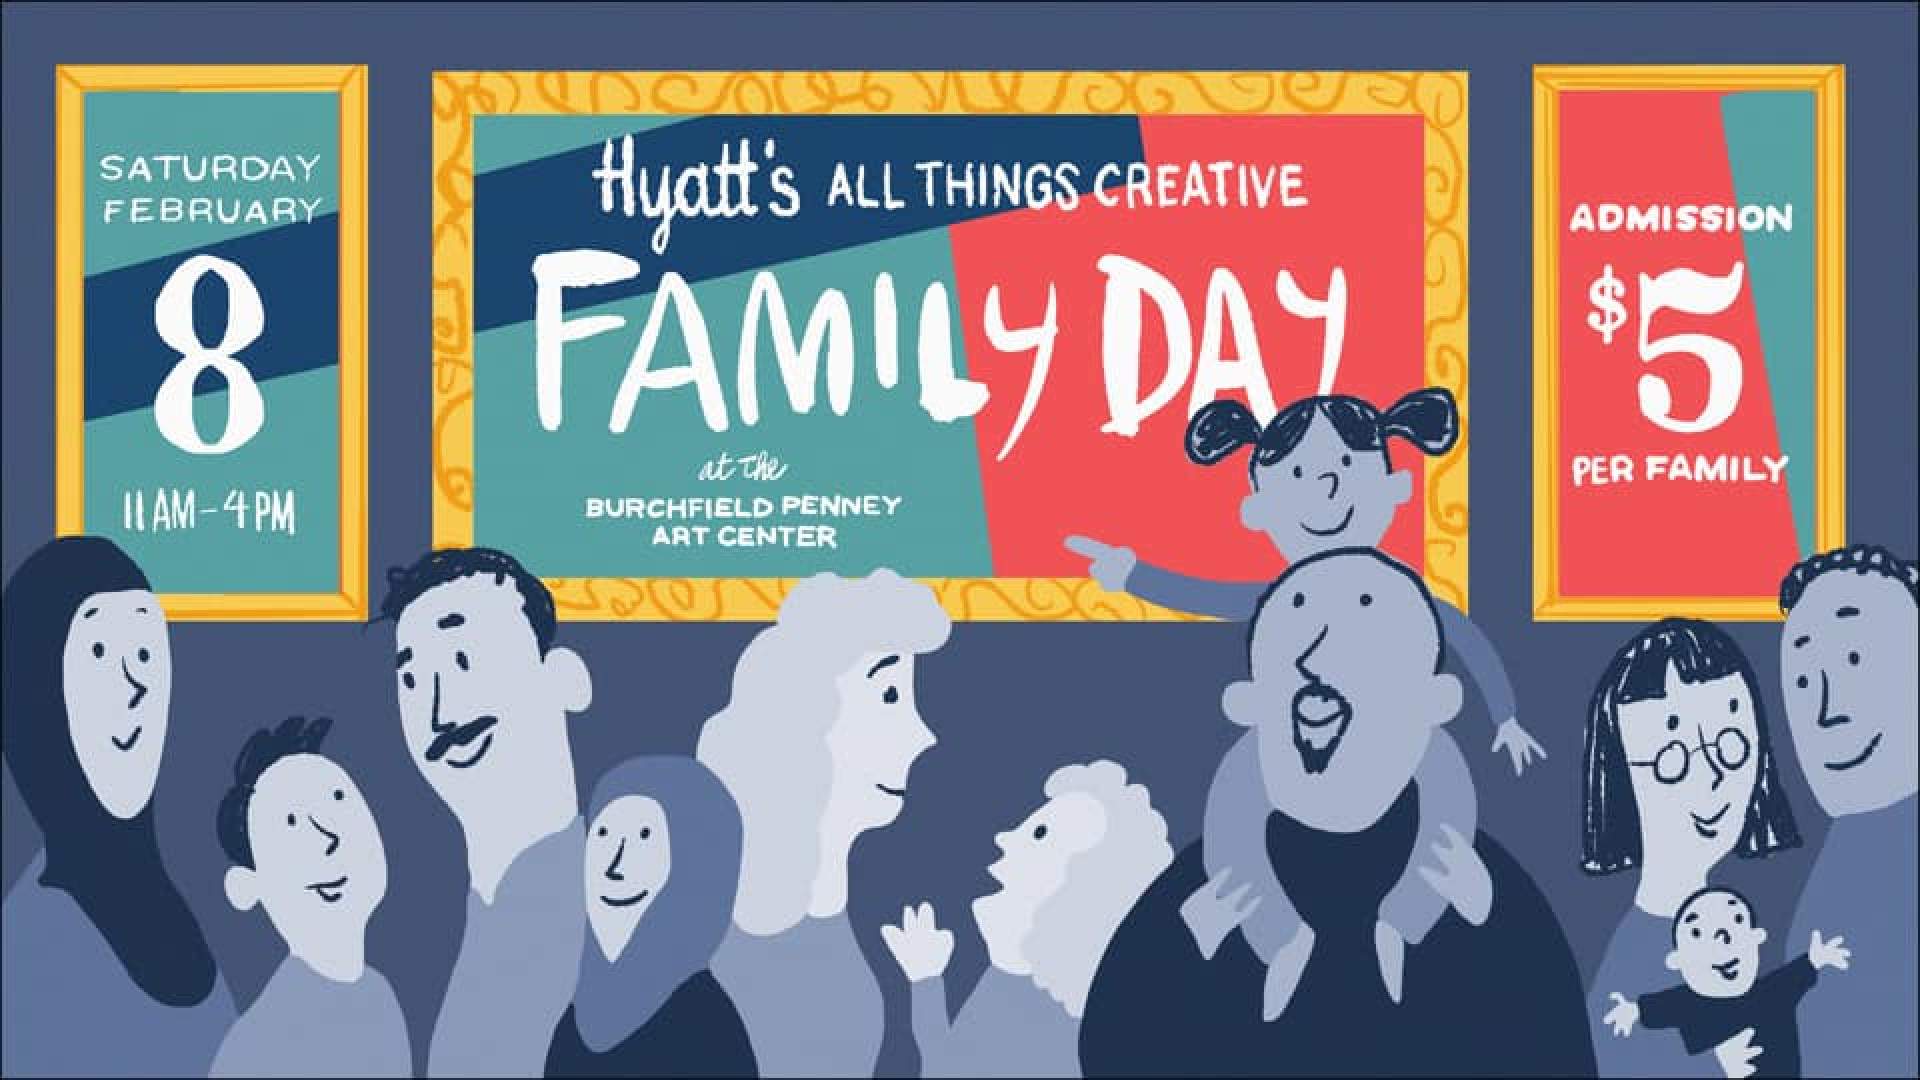 Hyatt's All Things Creative Family Day at the Burchfield Penney